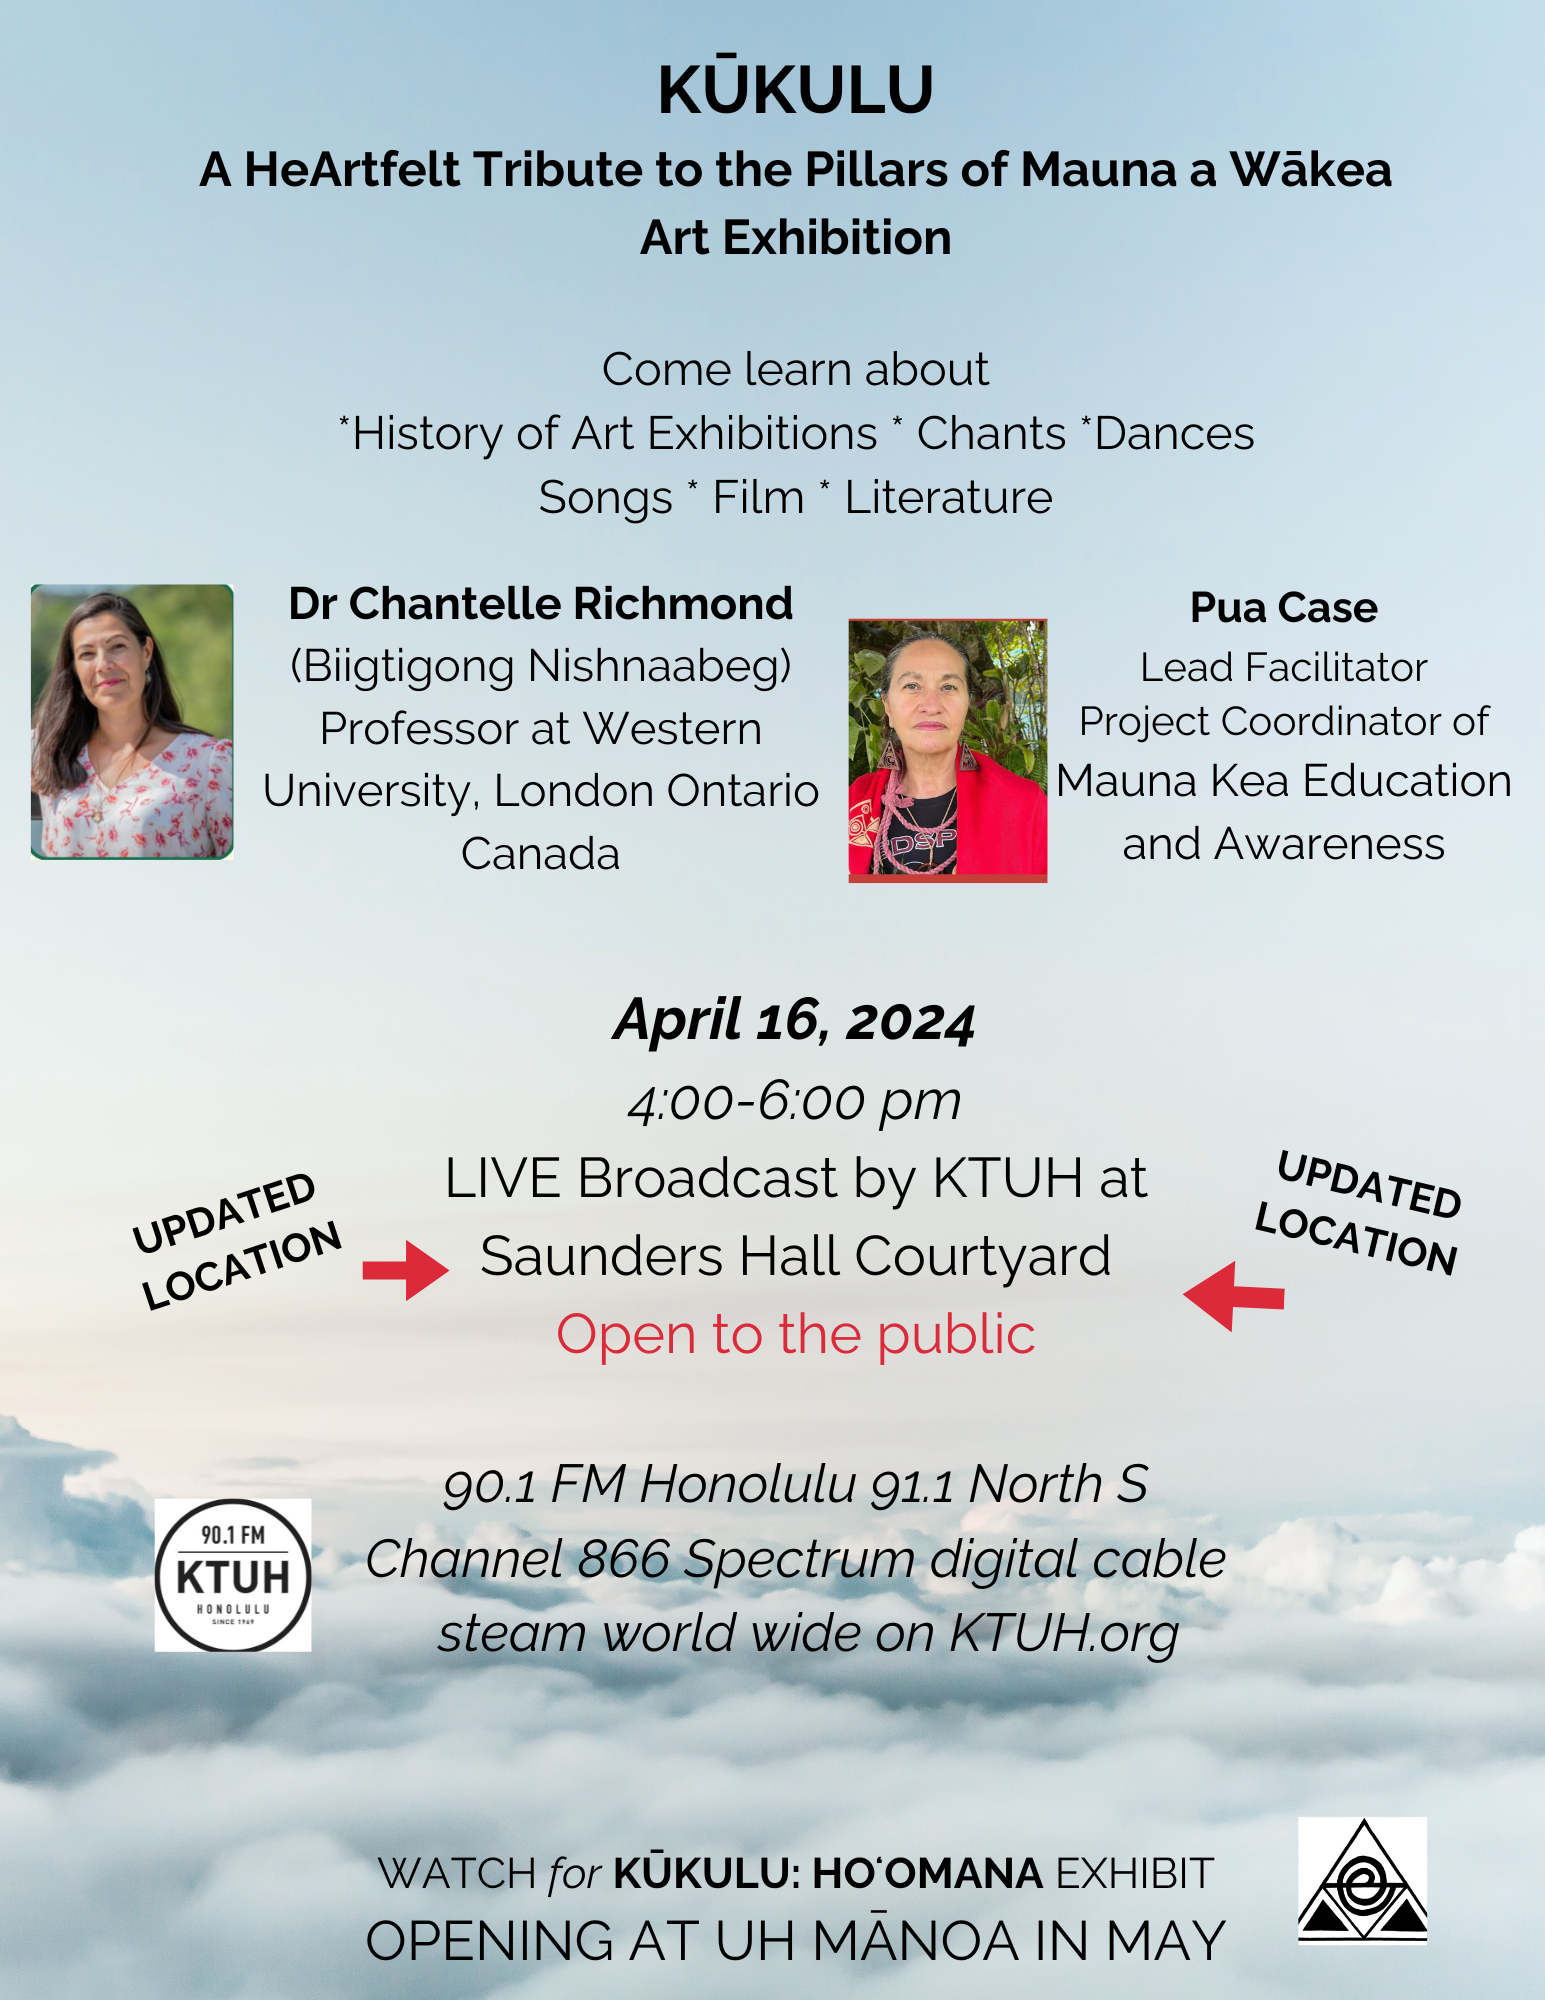 KTUH, NHSS, MKEA Presents An Overview of KŪKULU A HeArtfelt Tribute to the Pillars of Mauna a Wākea Art Exhibition Come and Learn about History of Art Exhibitions  Chants, Dances and Songs,  Film,MOST RECENT 4:9.png